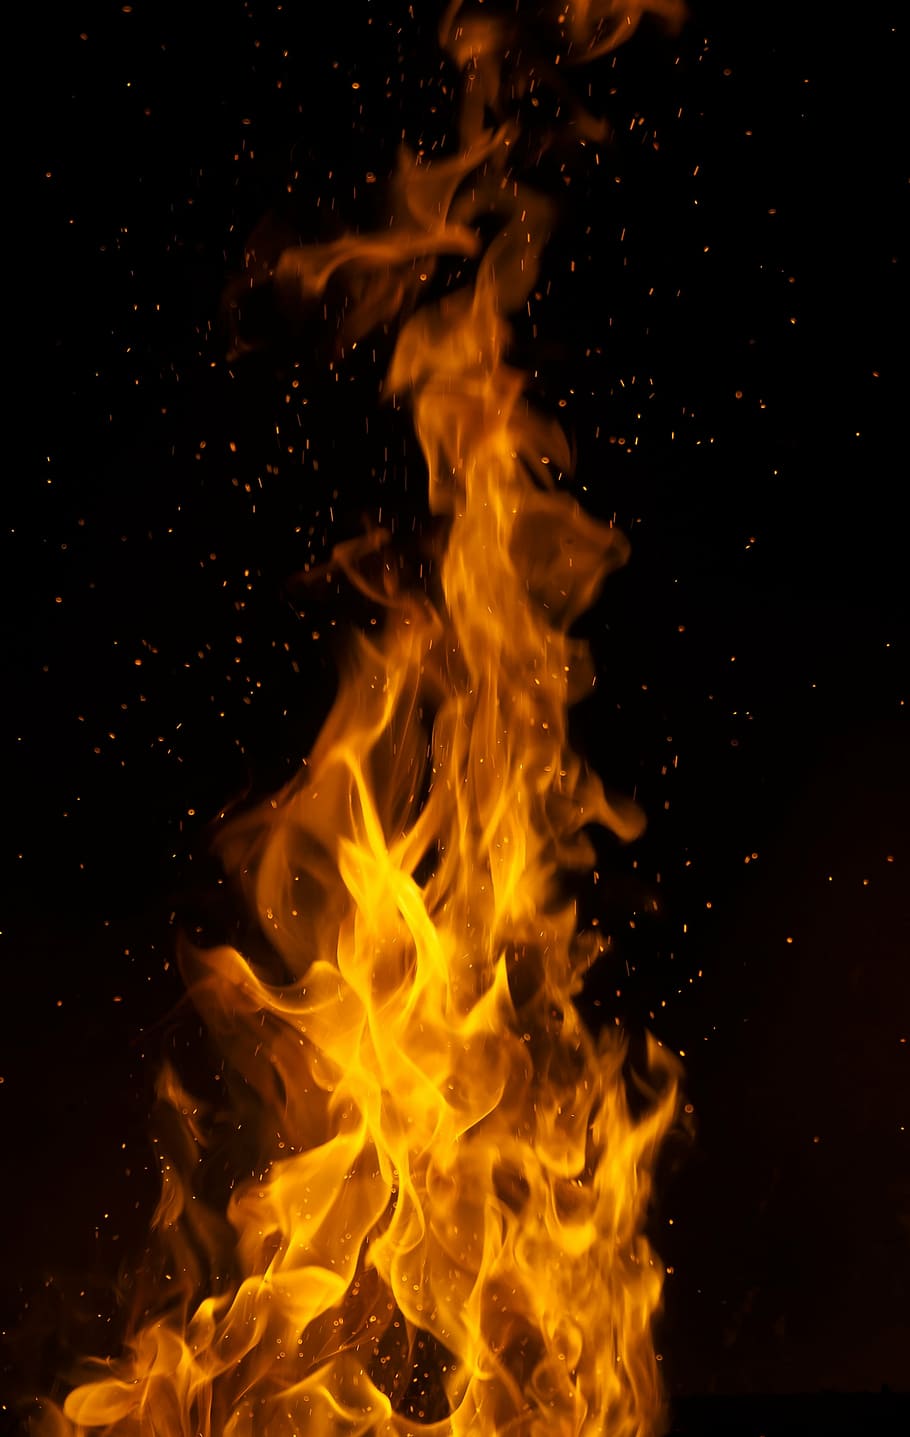 fire illustration, flame, fire, forge, heat - temperature, red, burning, yellow, inferno, close-up